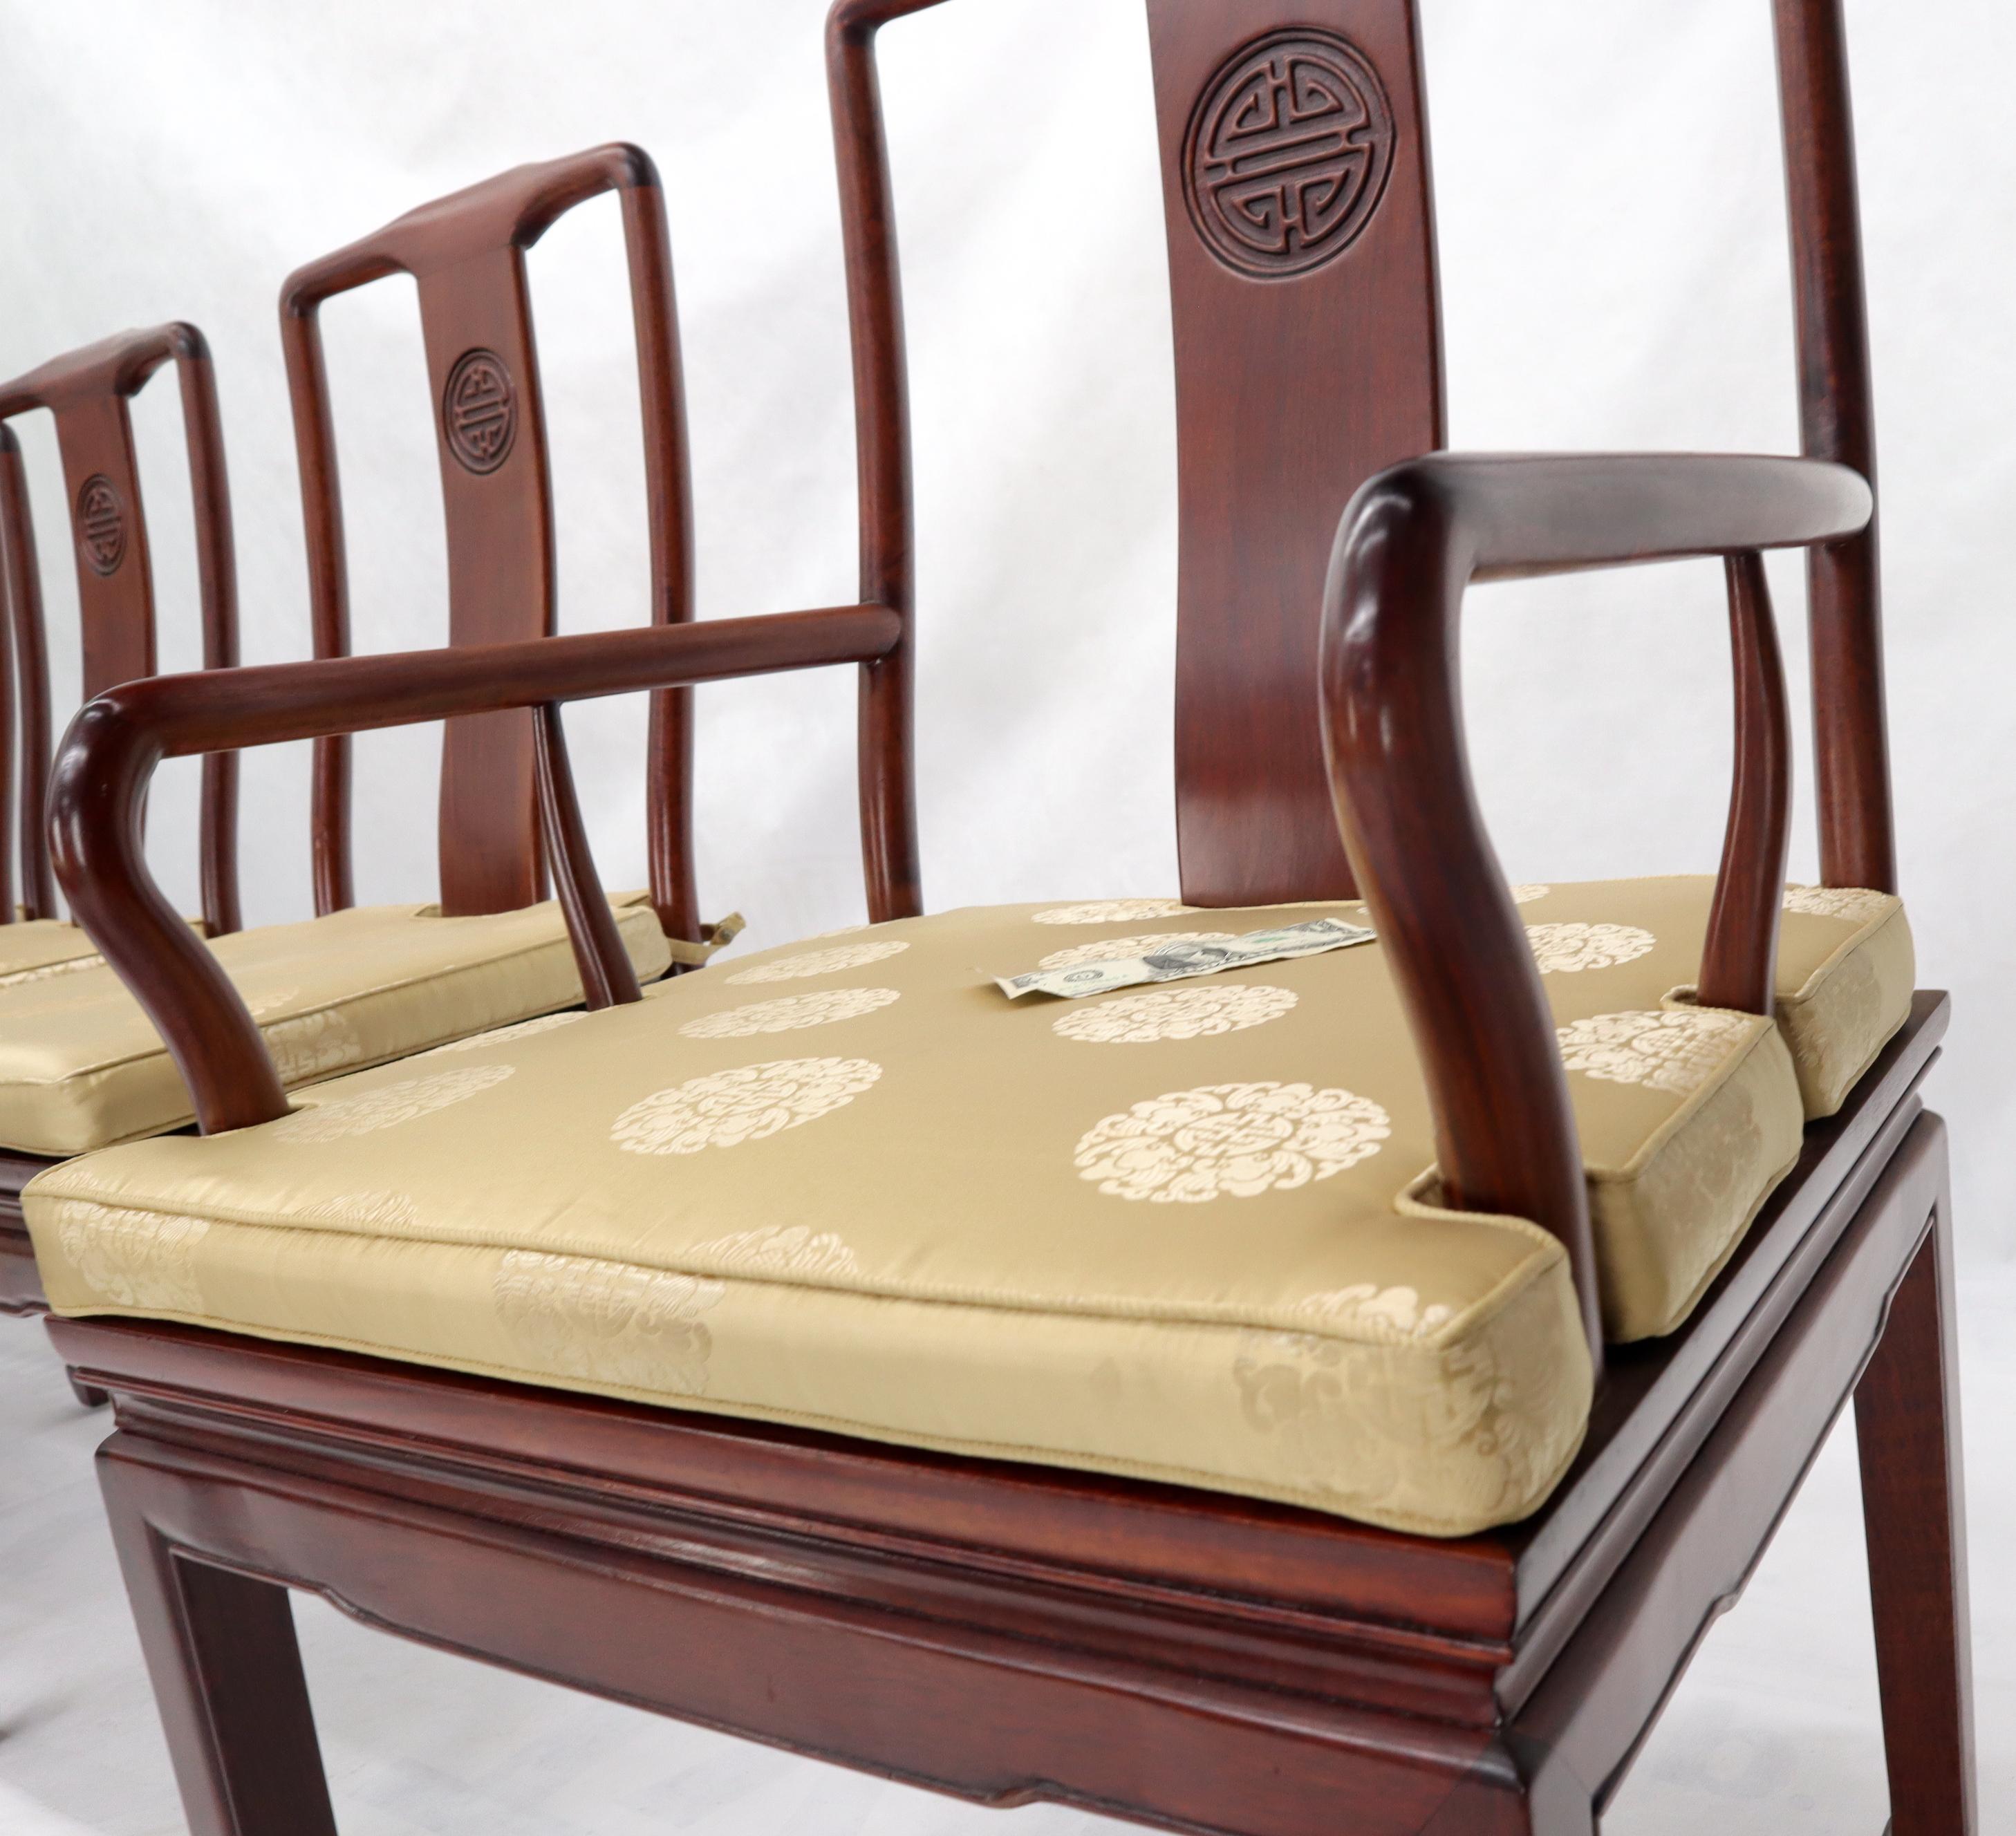 20th Century Set of 8 Solid Rosewood High Quality Chinese Asian Dining Room Chairs For Sale